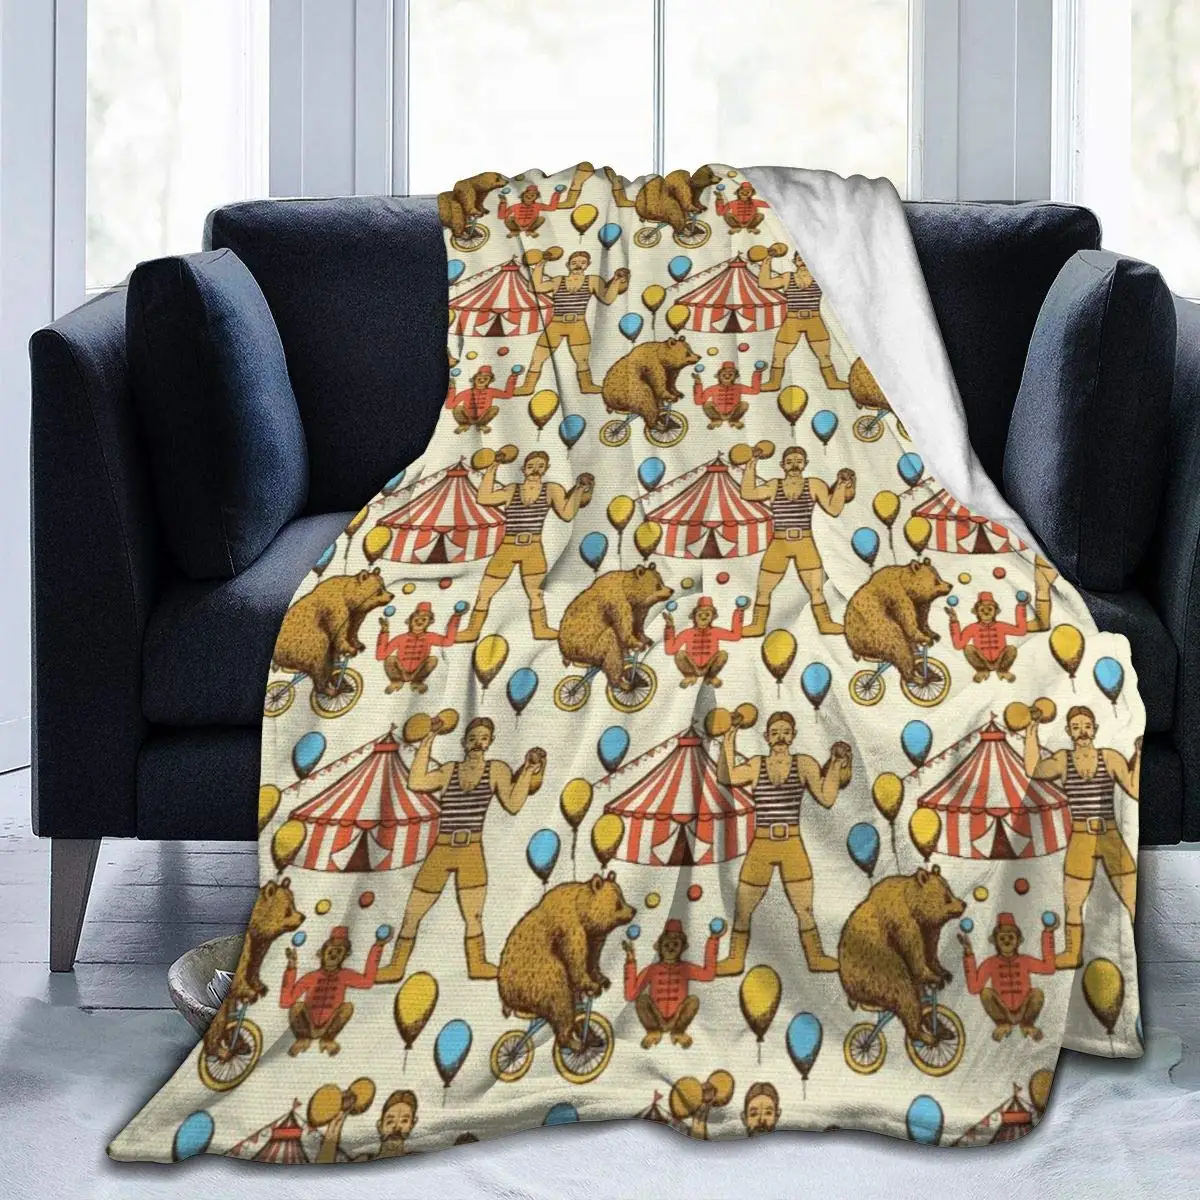 

Flannel Fleece Throw Blanket Sketchy Circles in Vintage Style Bear Rigdding On A Bicycle Strongman Print Soft Warm Fuzzy